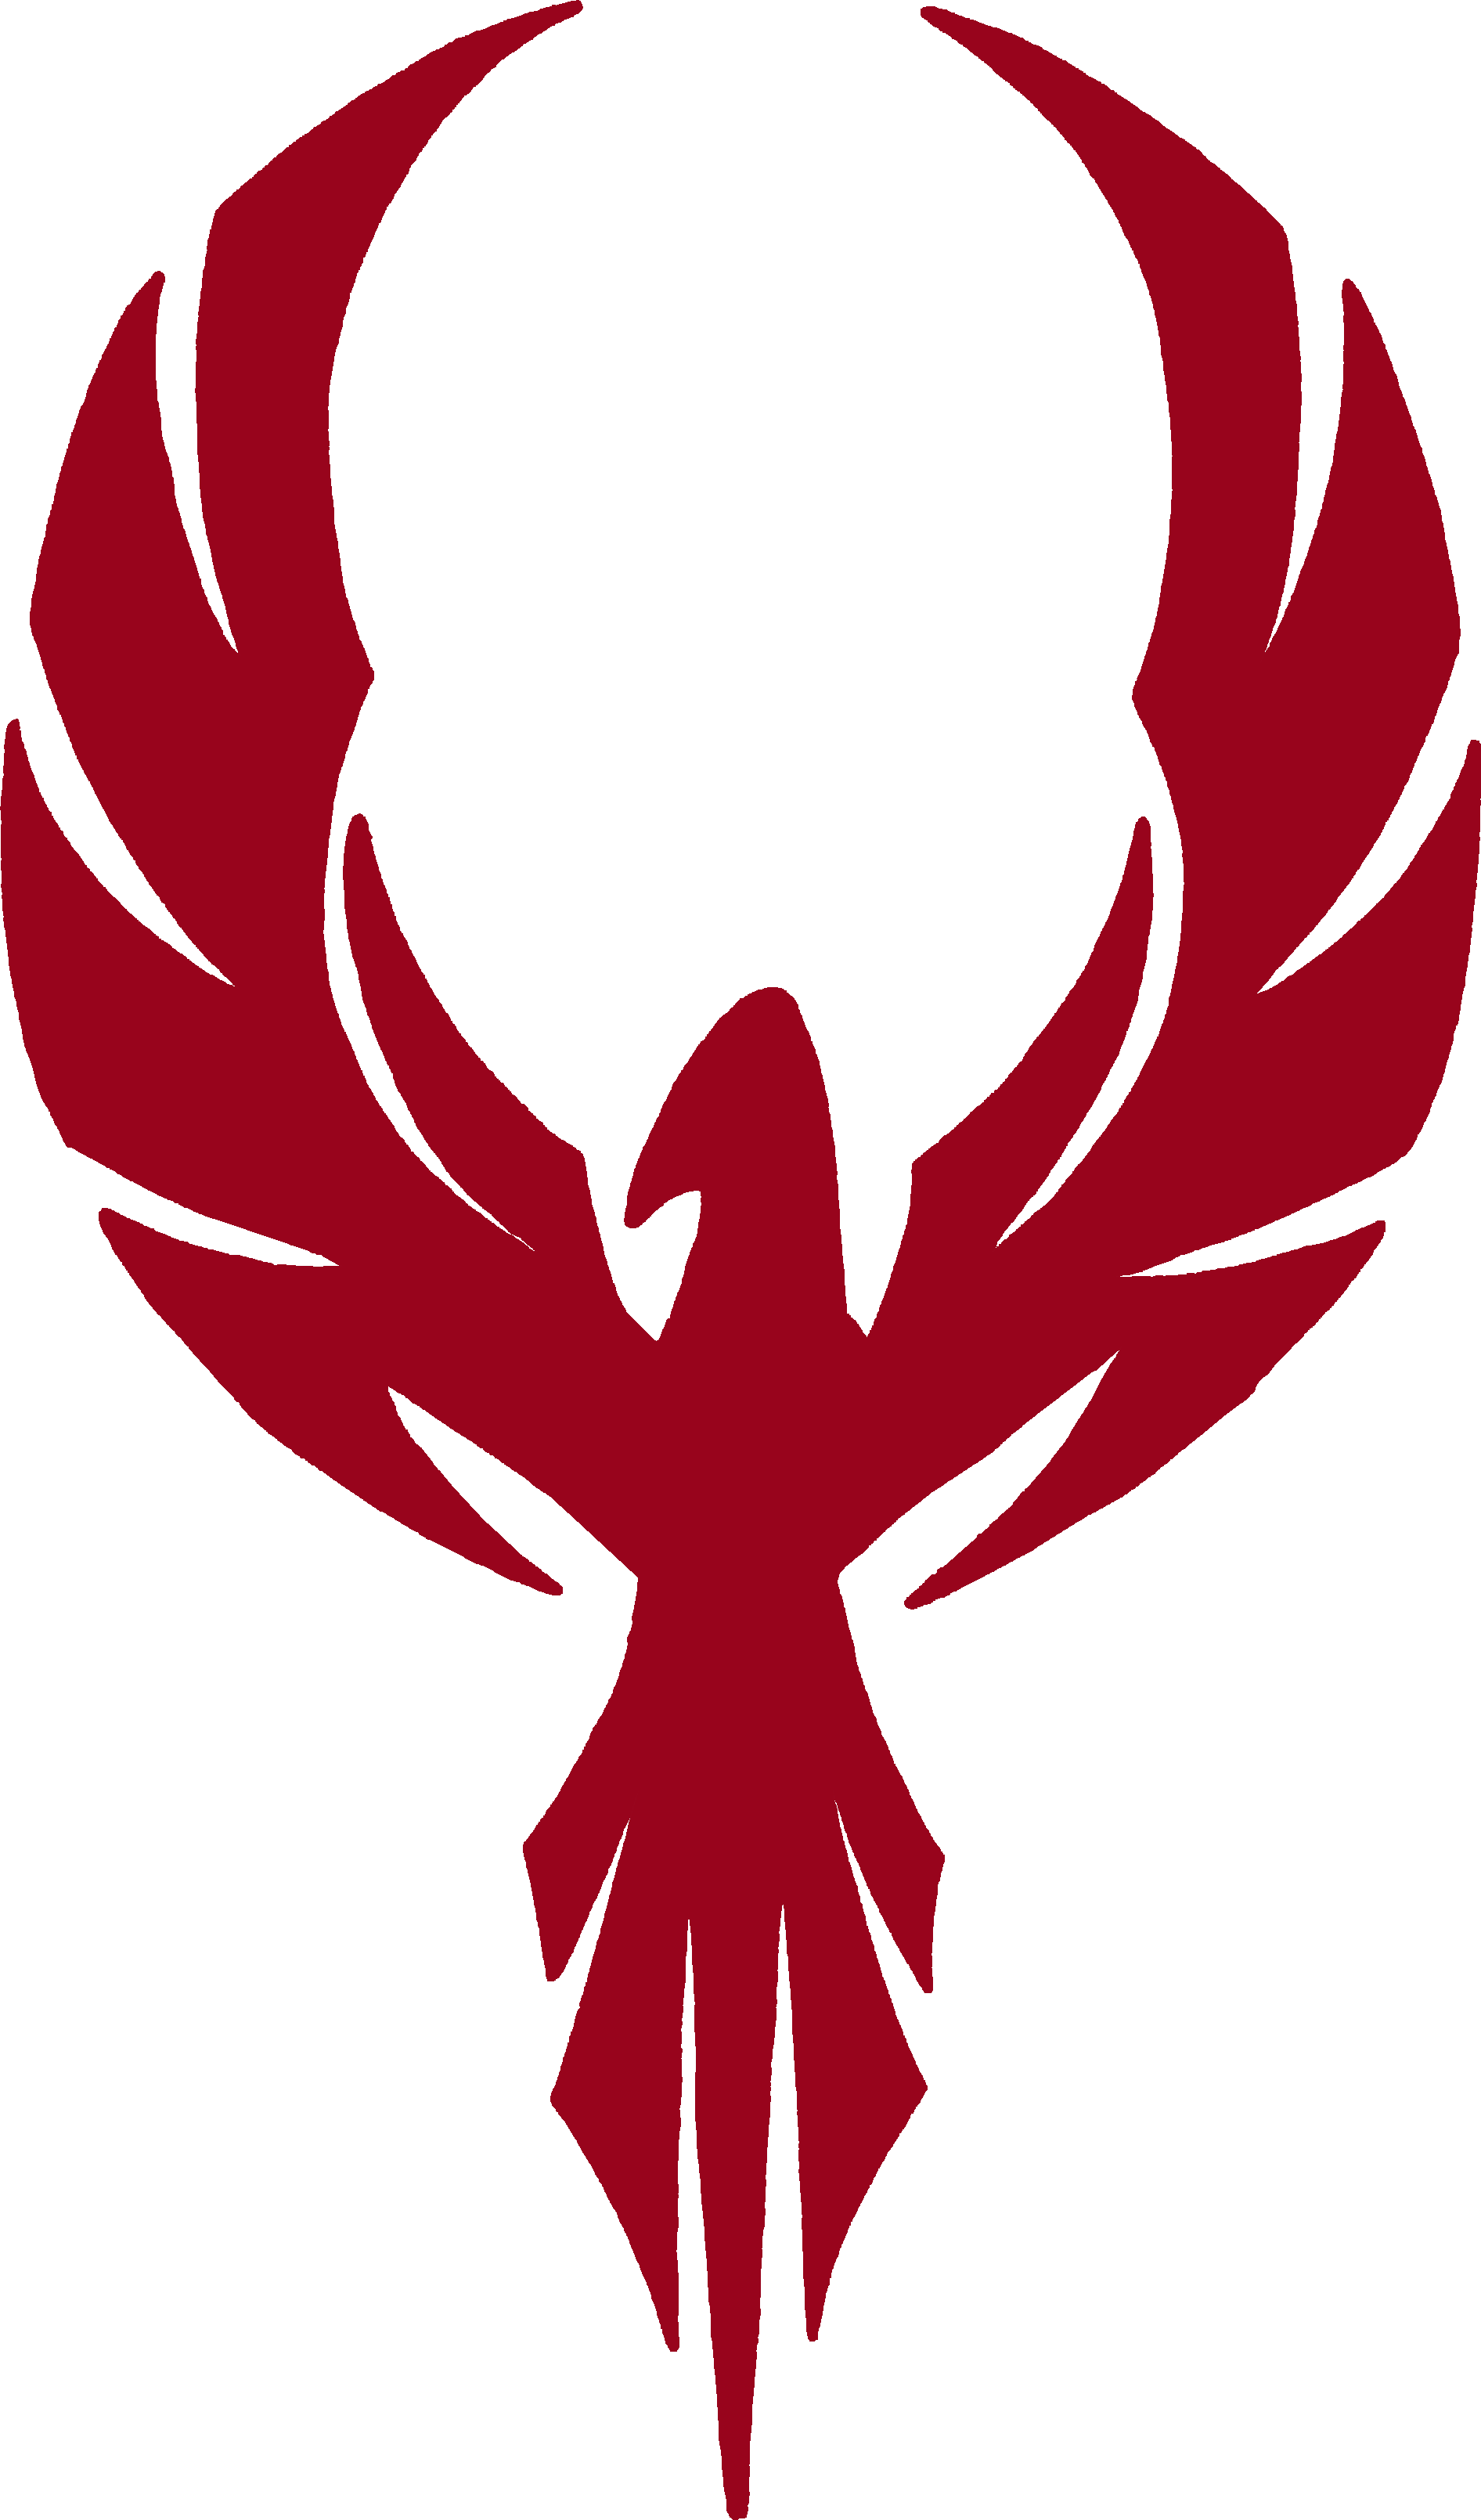 Red Phoenix Logo - Tribal Phoenix Symbol. Spray Painted On The Crumbled